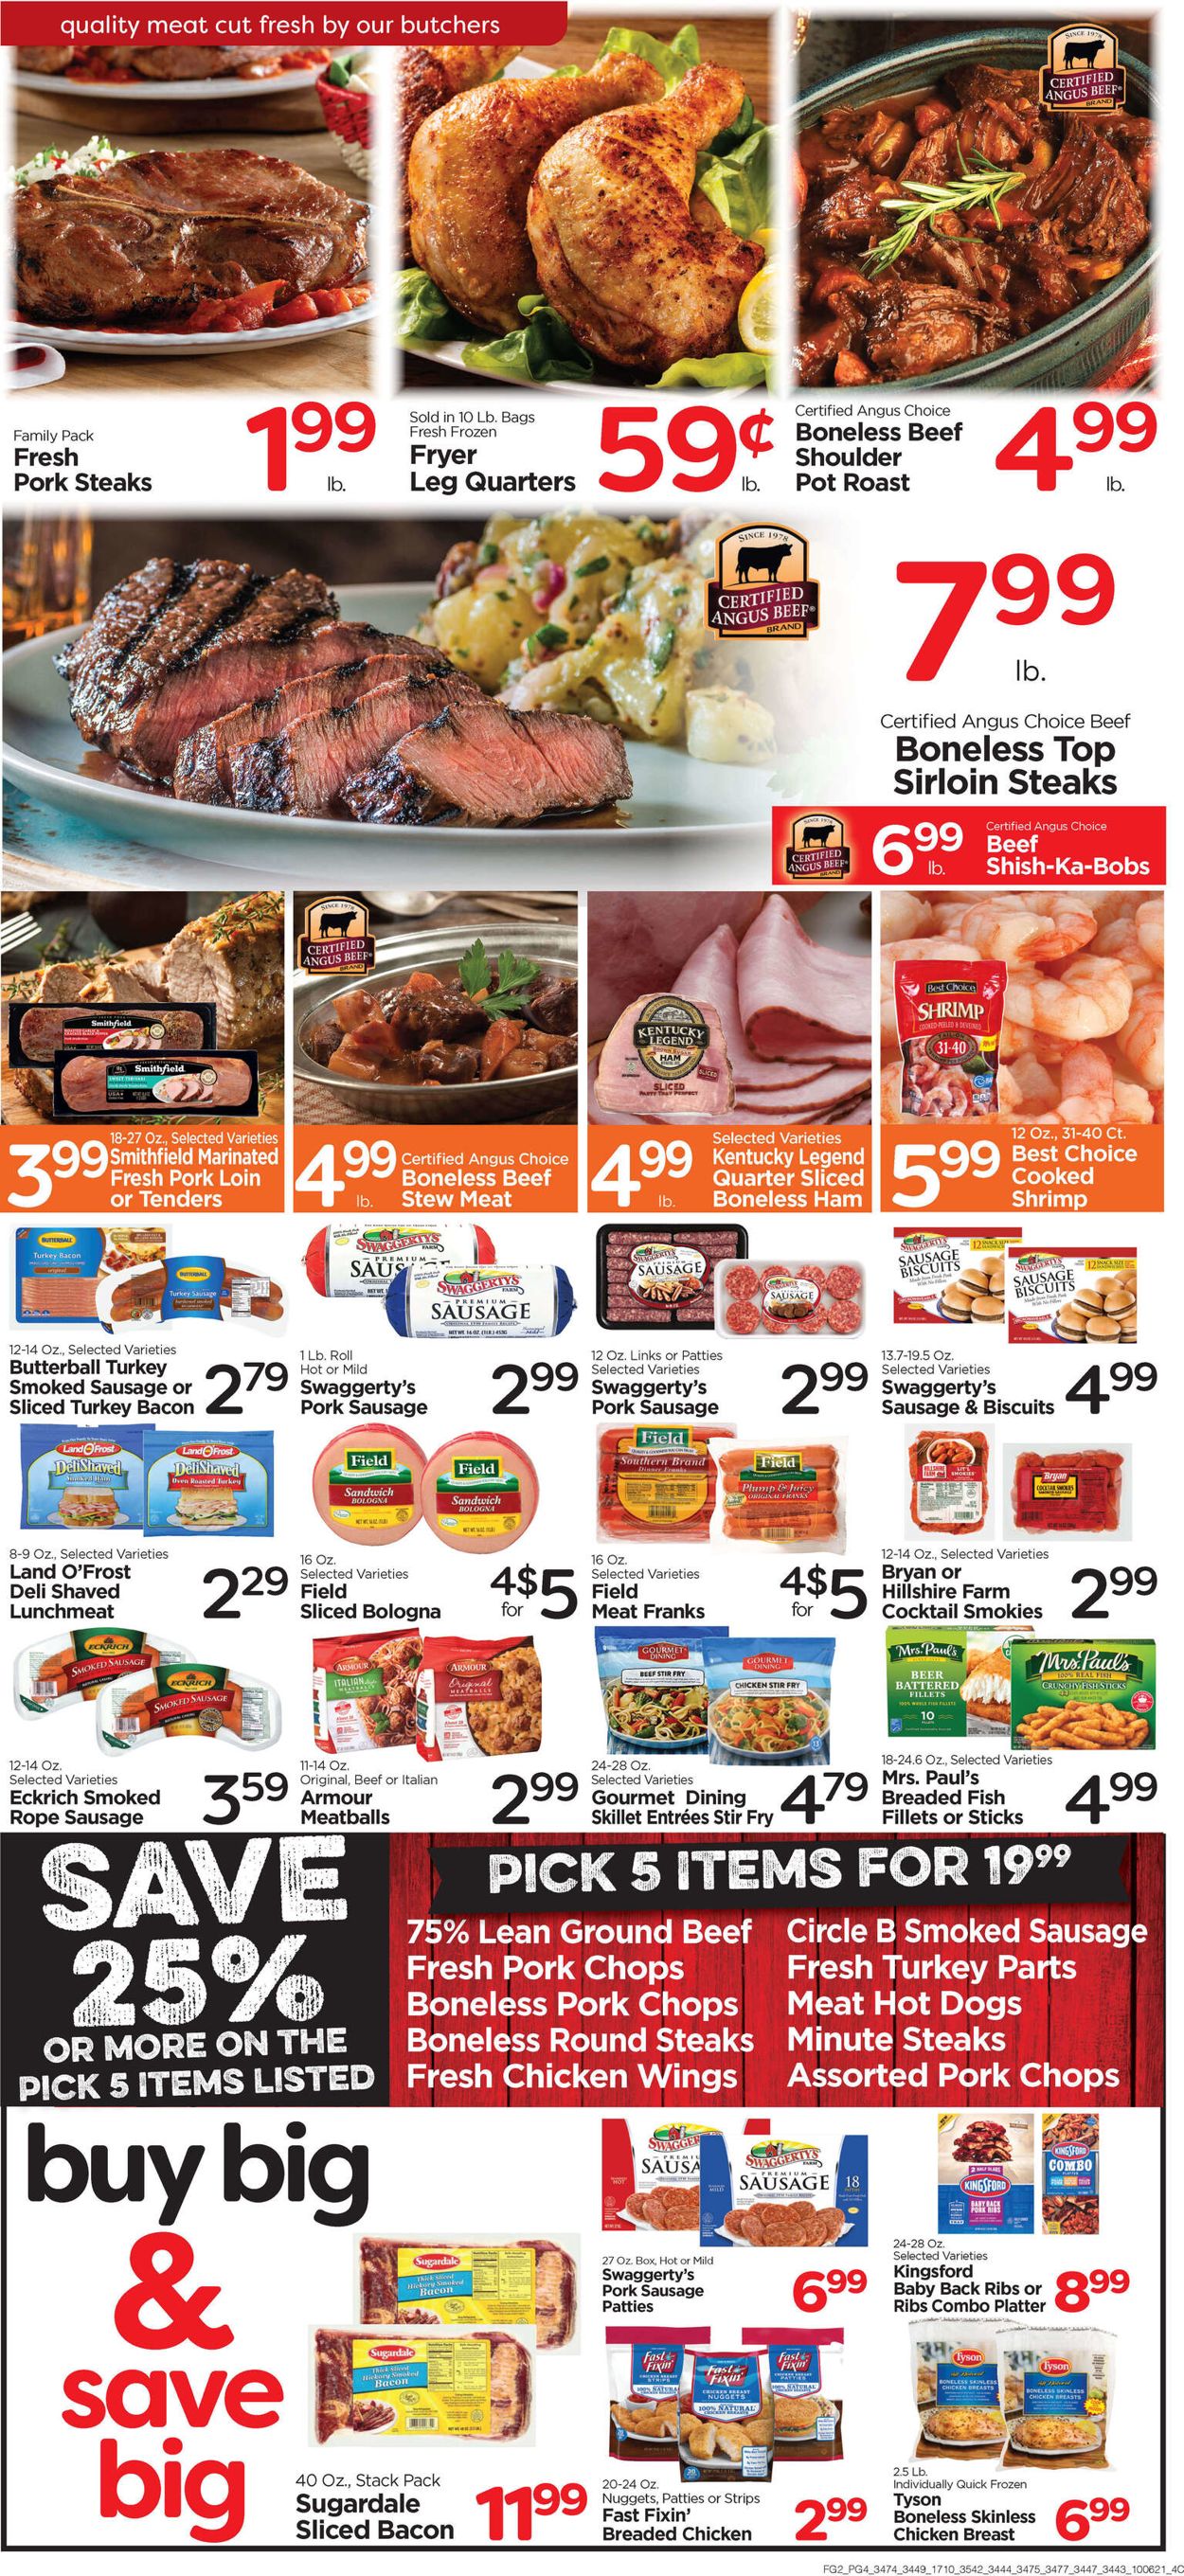 Catalogue Edwards Food Giant from 10/06/2021